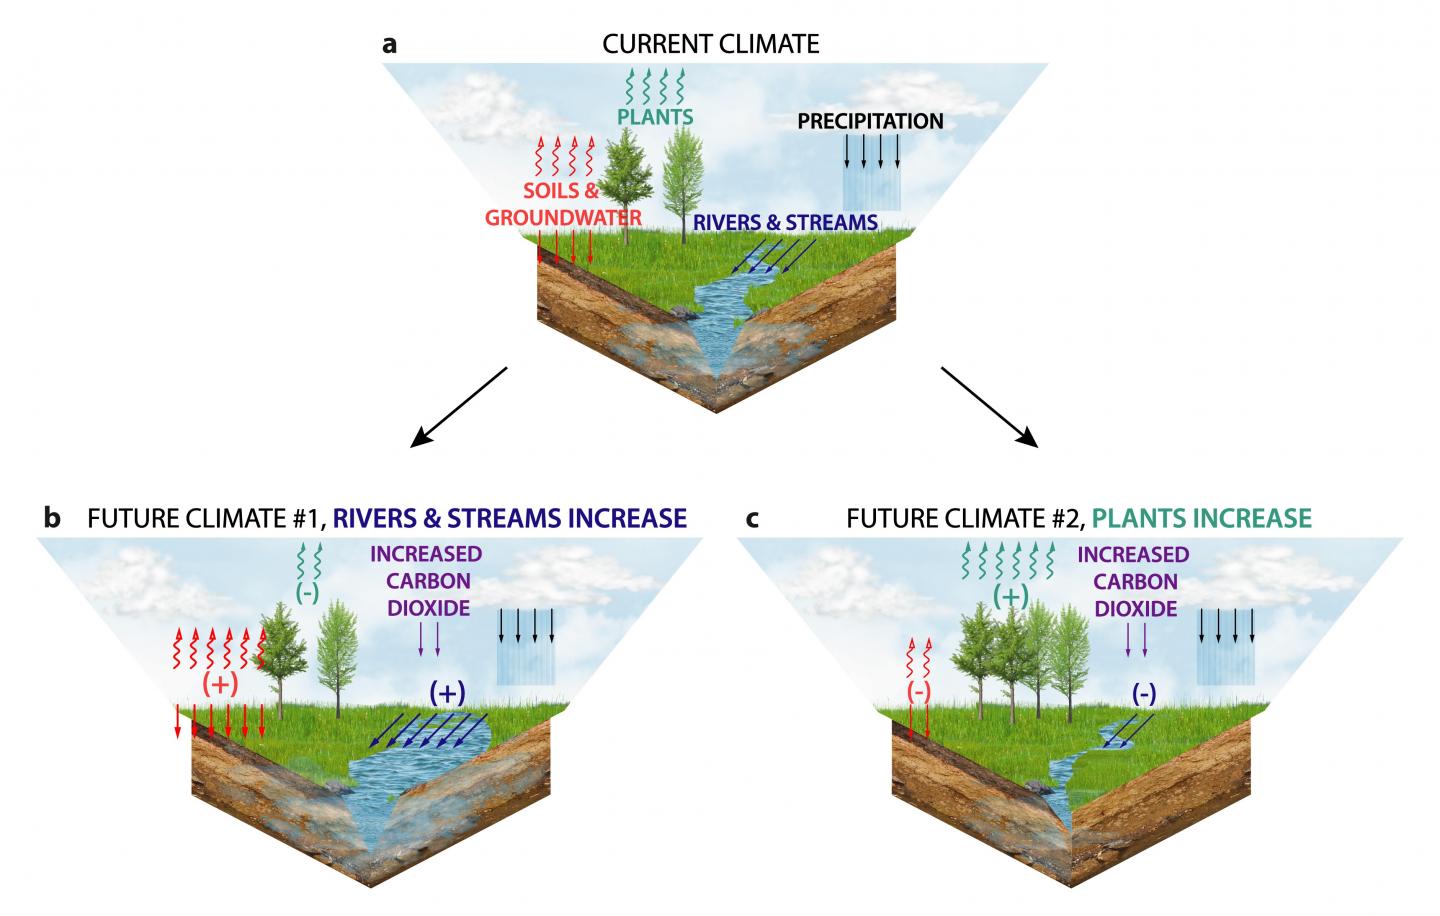 Allocation of Water in the Current Climate and Two Future Climates with High Carbon Dioxide